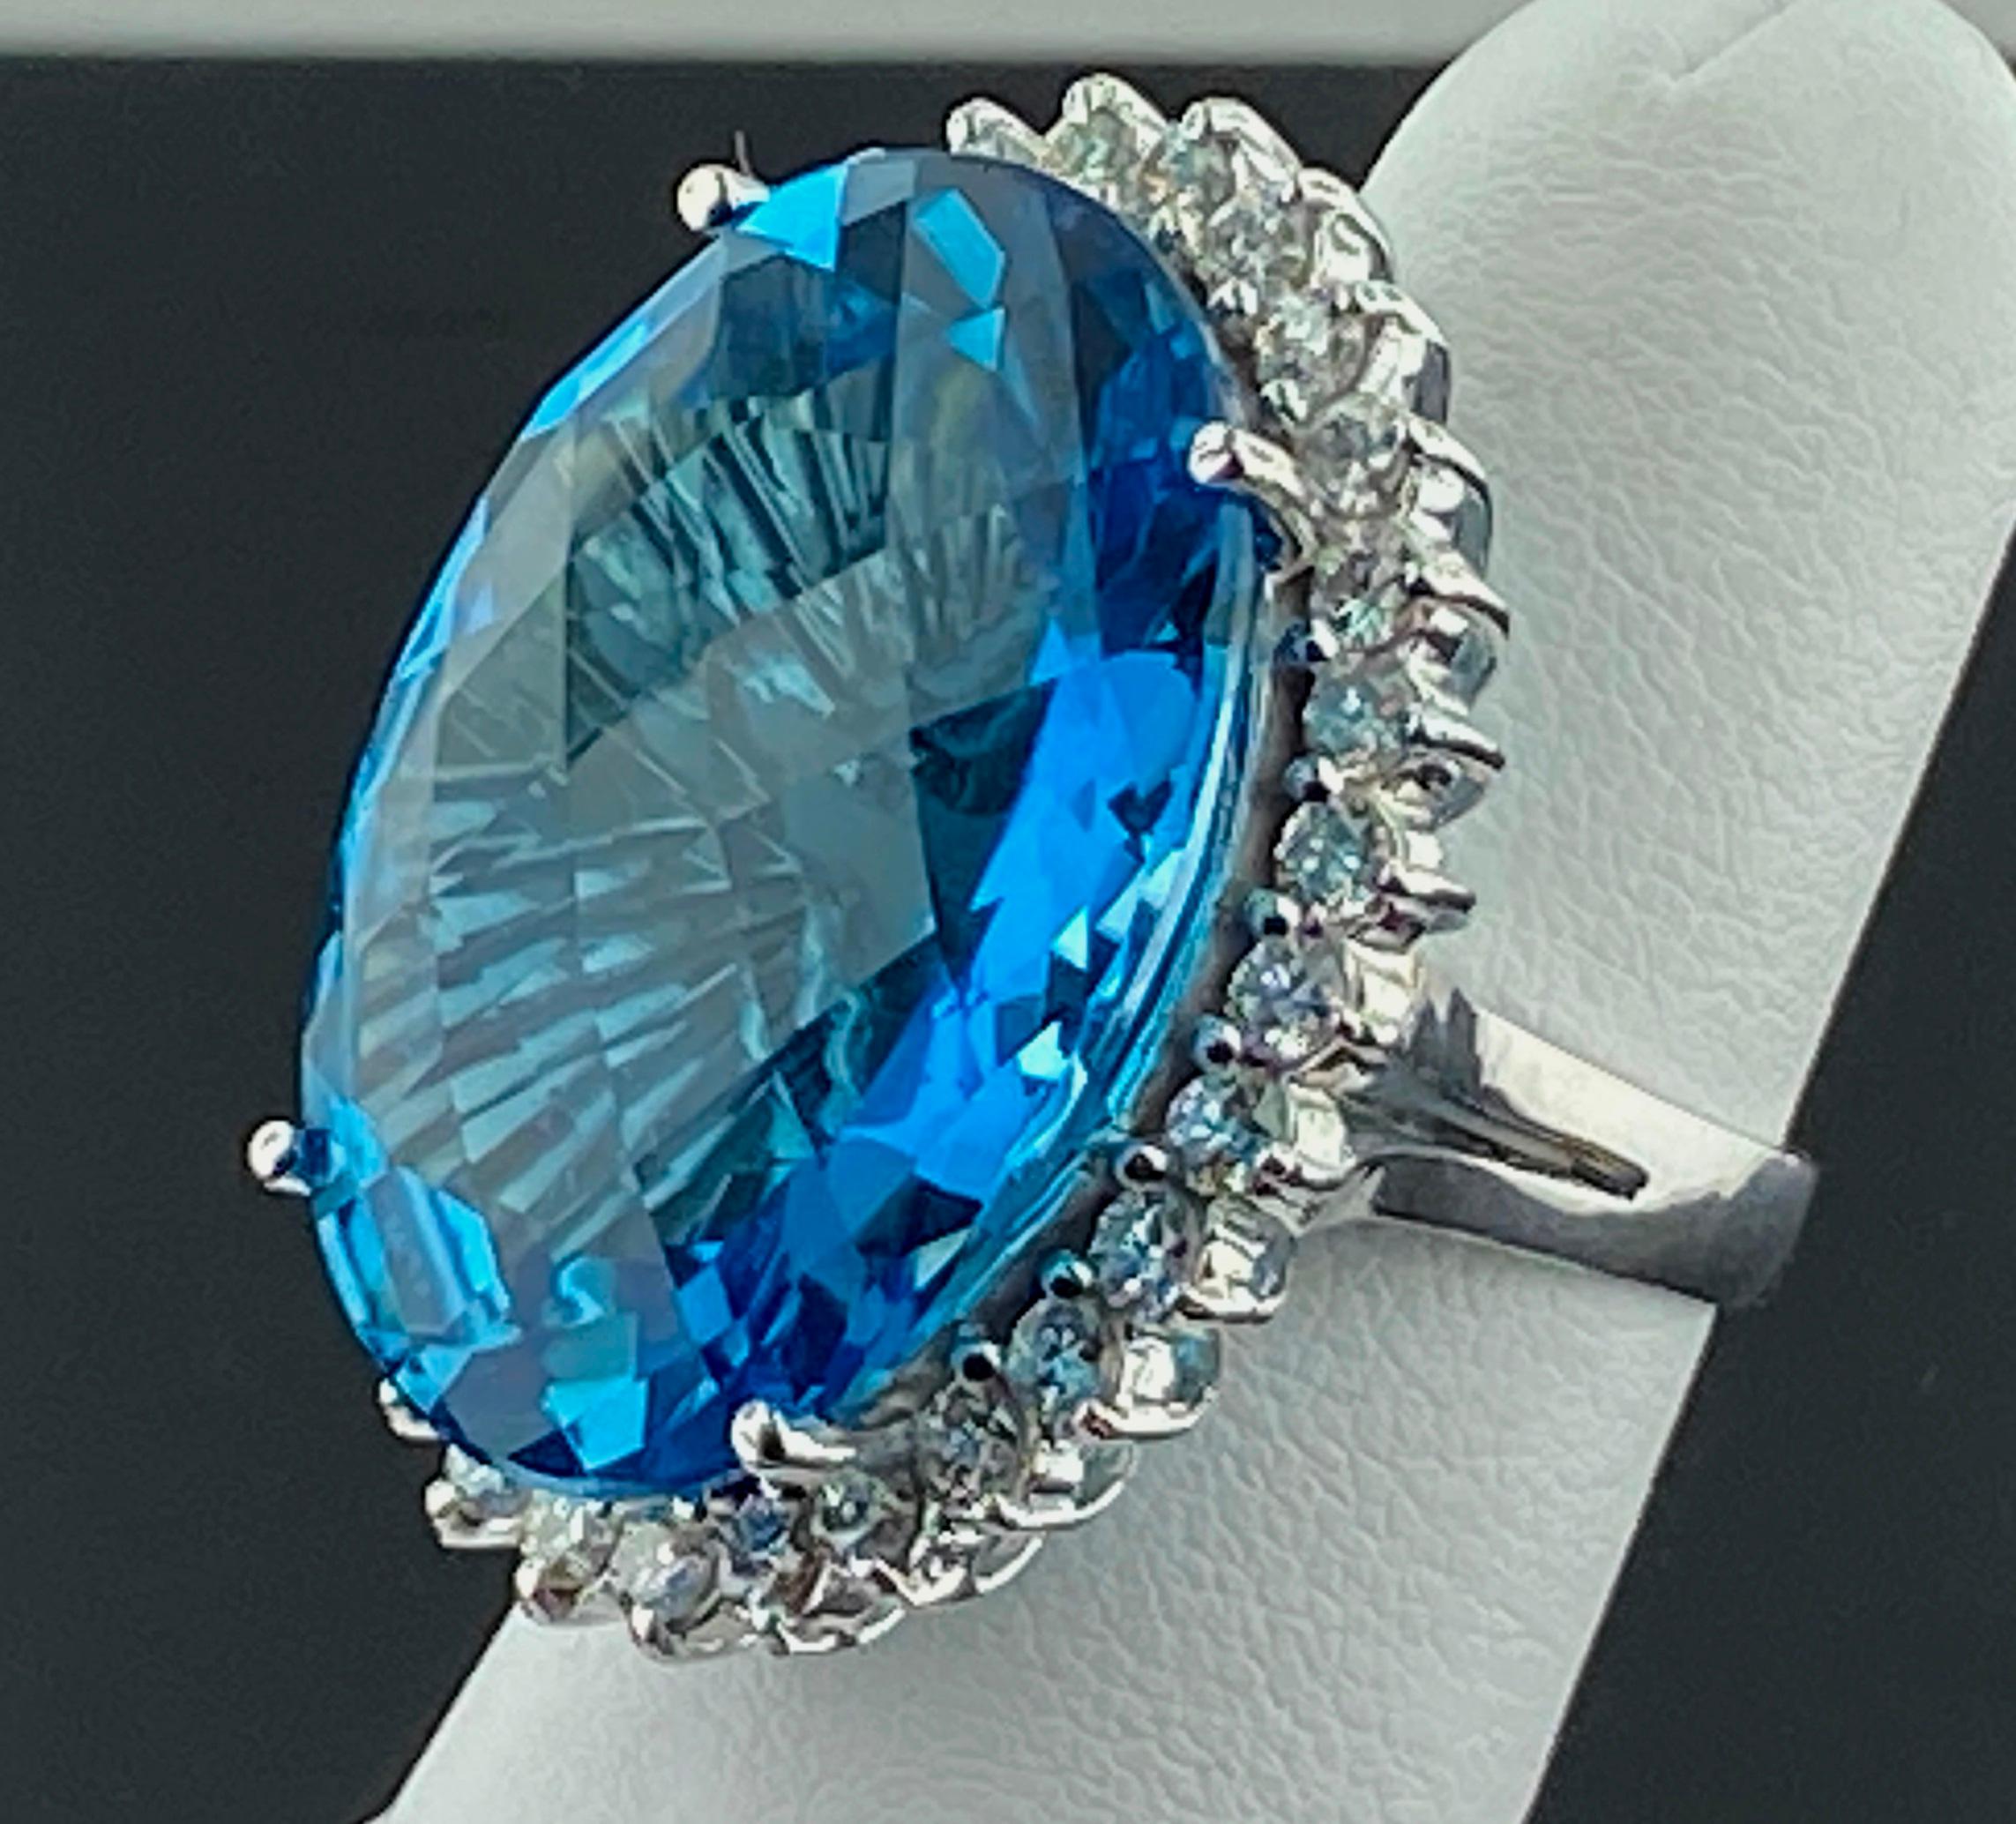 Set in 14 karat white gold, weighing 20 grams, is a beautiful 40 carat Oval Cut London Blue Topaz ring with 30 Round Brilliant Cut diamonds weighing 1.50 carats.  Color: F-G, Clarity: SI-1.  Ring size 6.5.